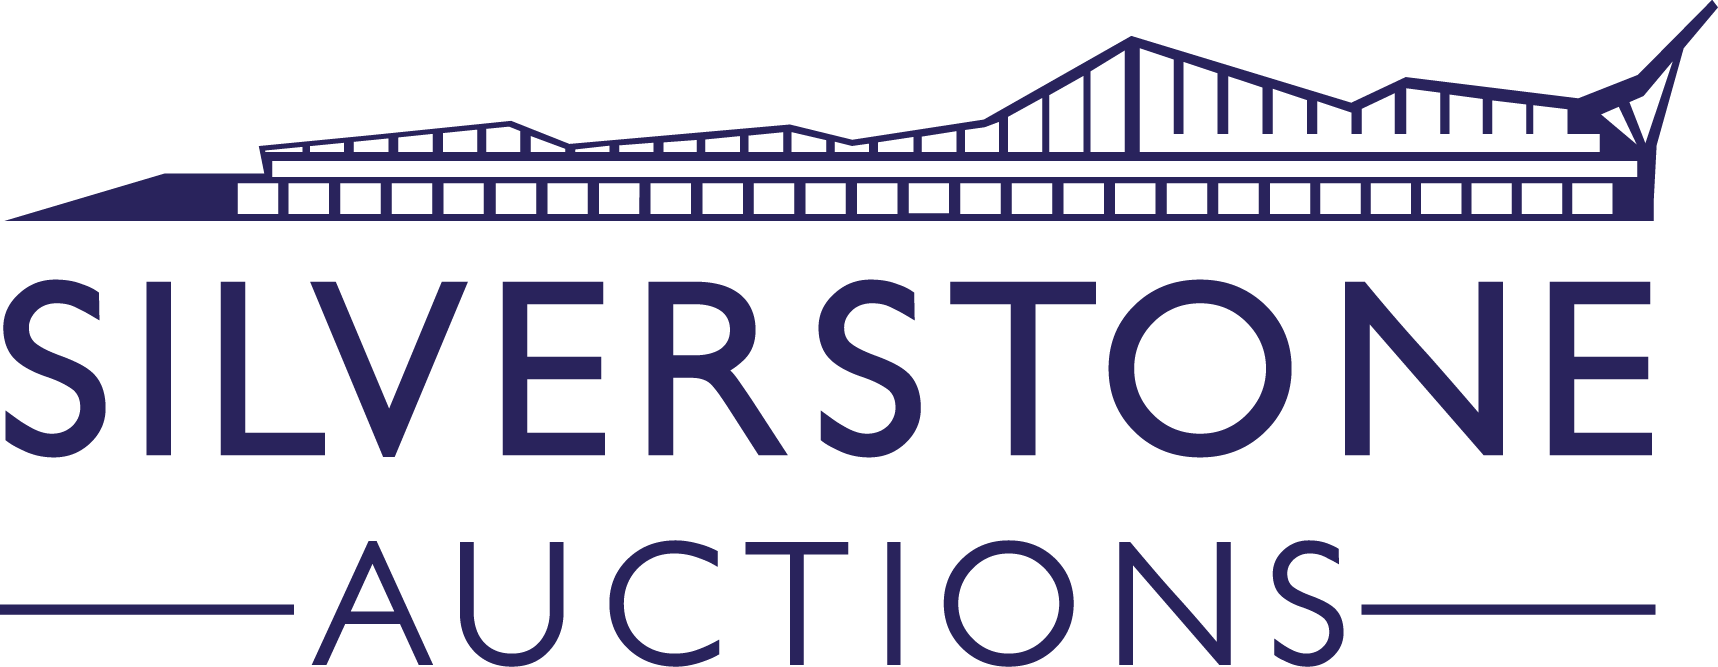 Silverstone Auctions logo